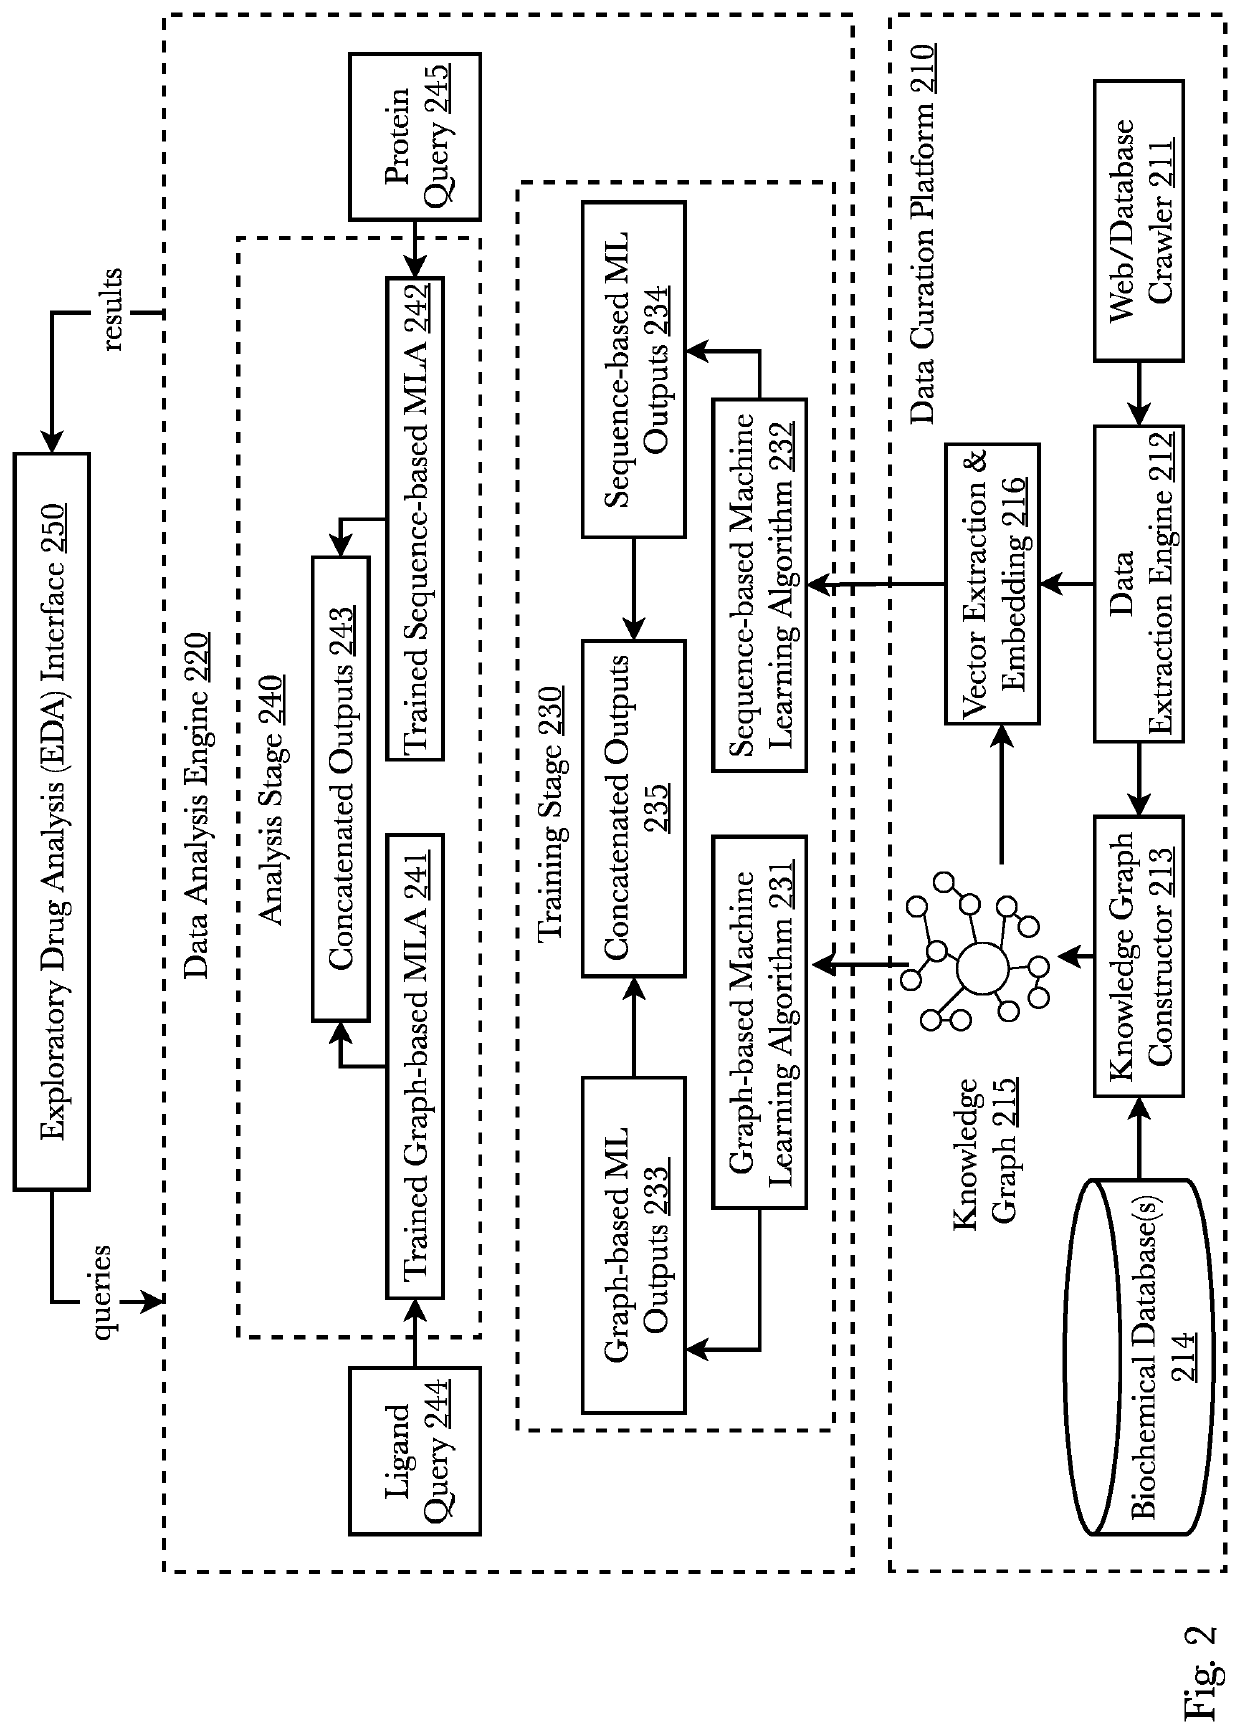 Data platform for automated pharmaceutical research using knowledge graph